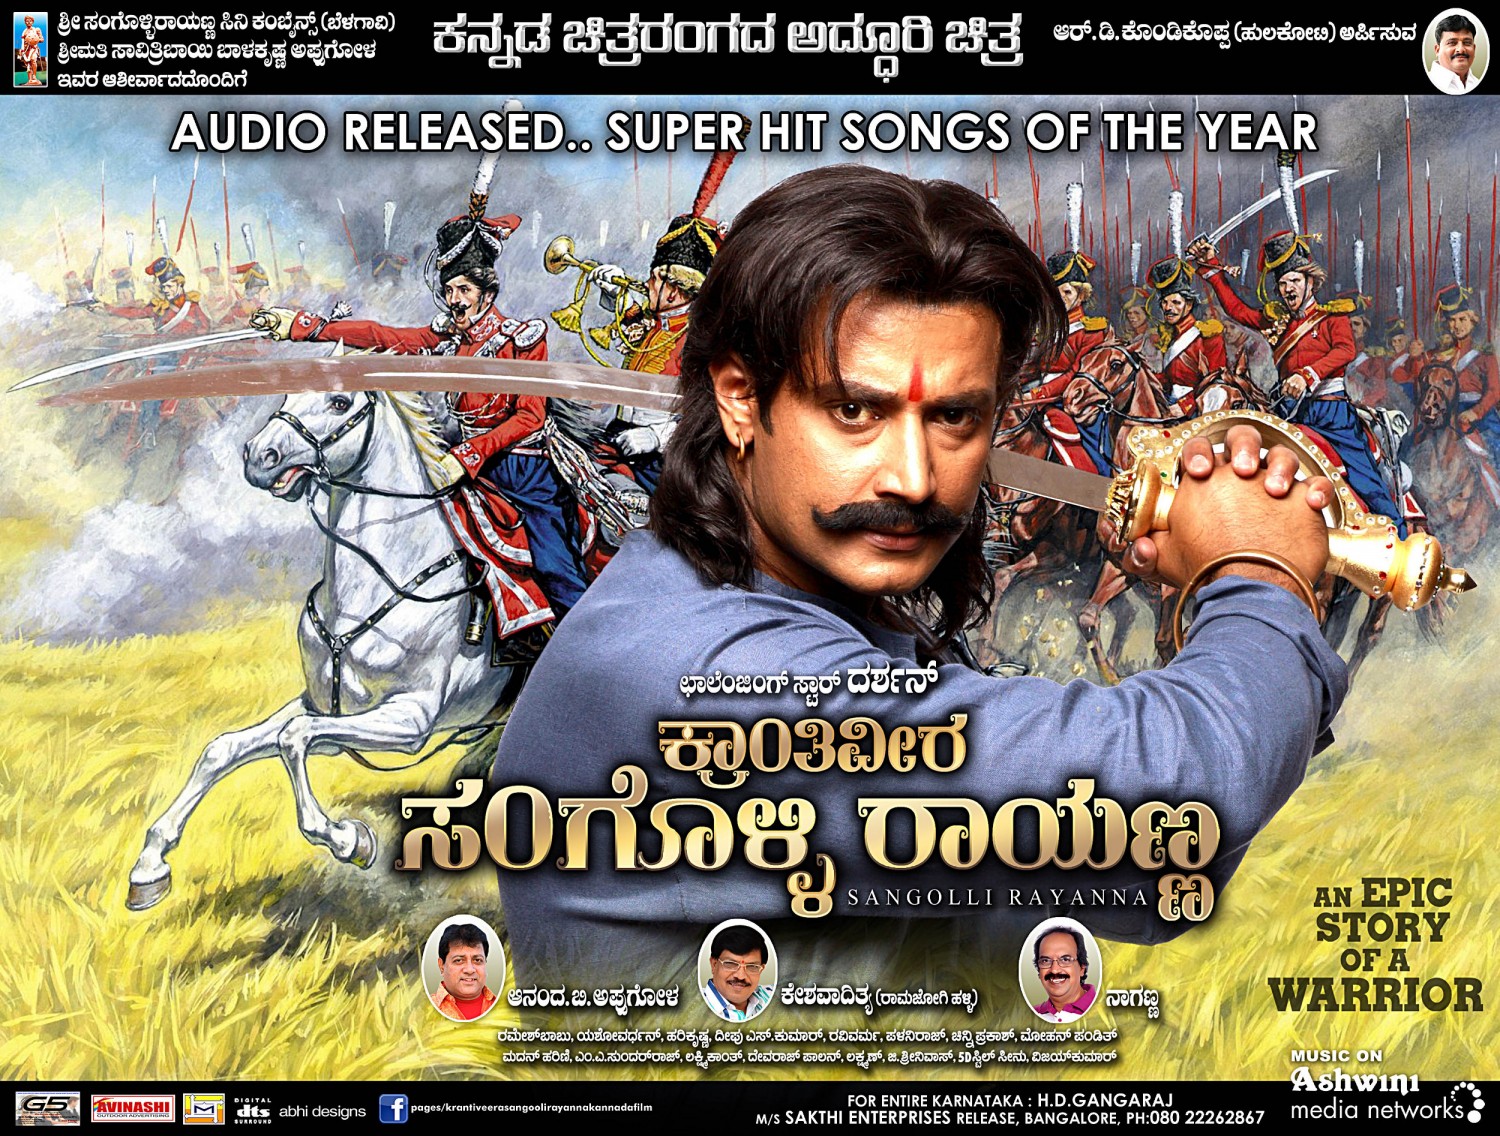 Extra Large Movie Poster Image for Sangolli Rayanna (#41 of 79)